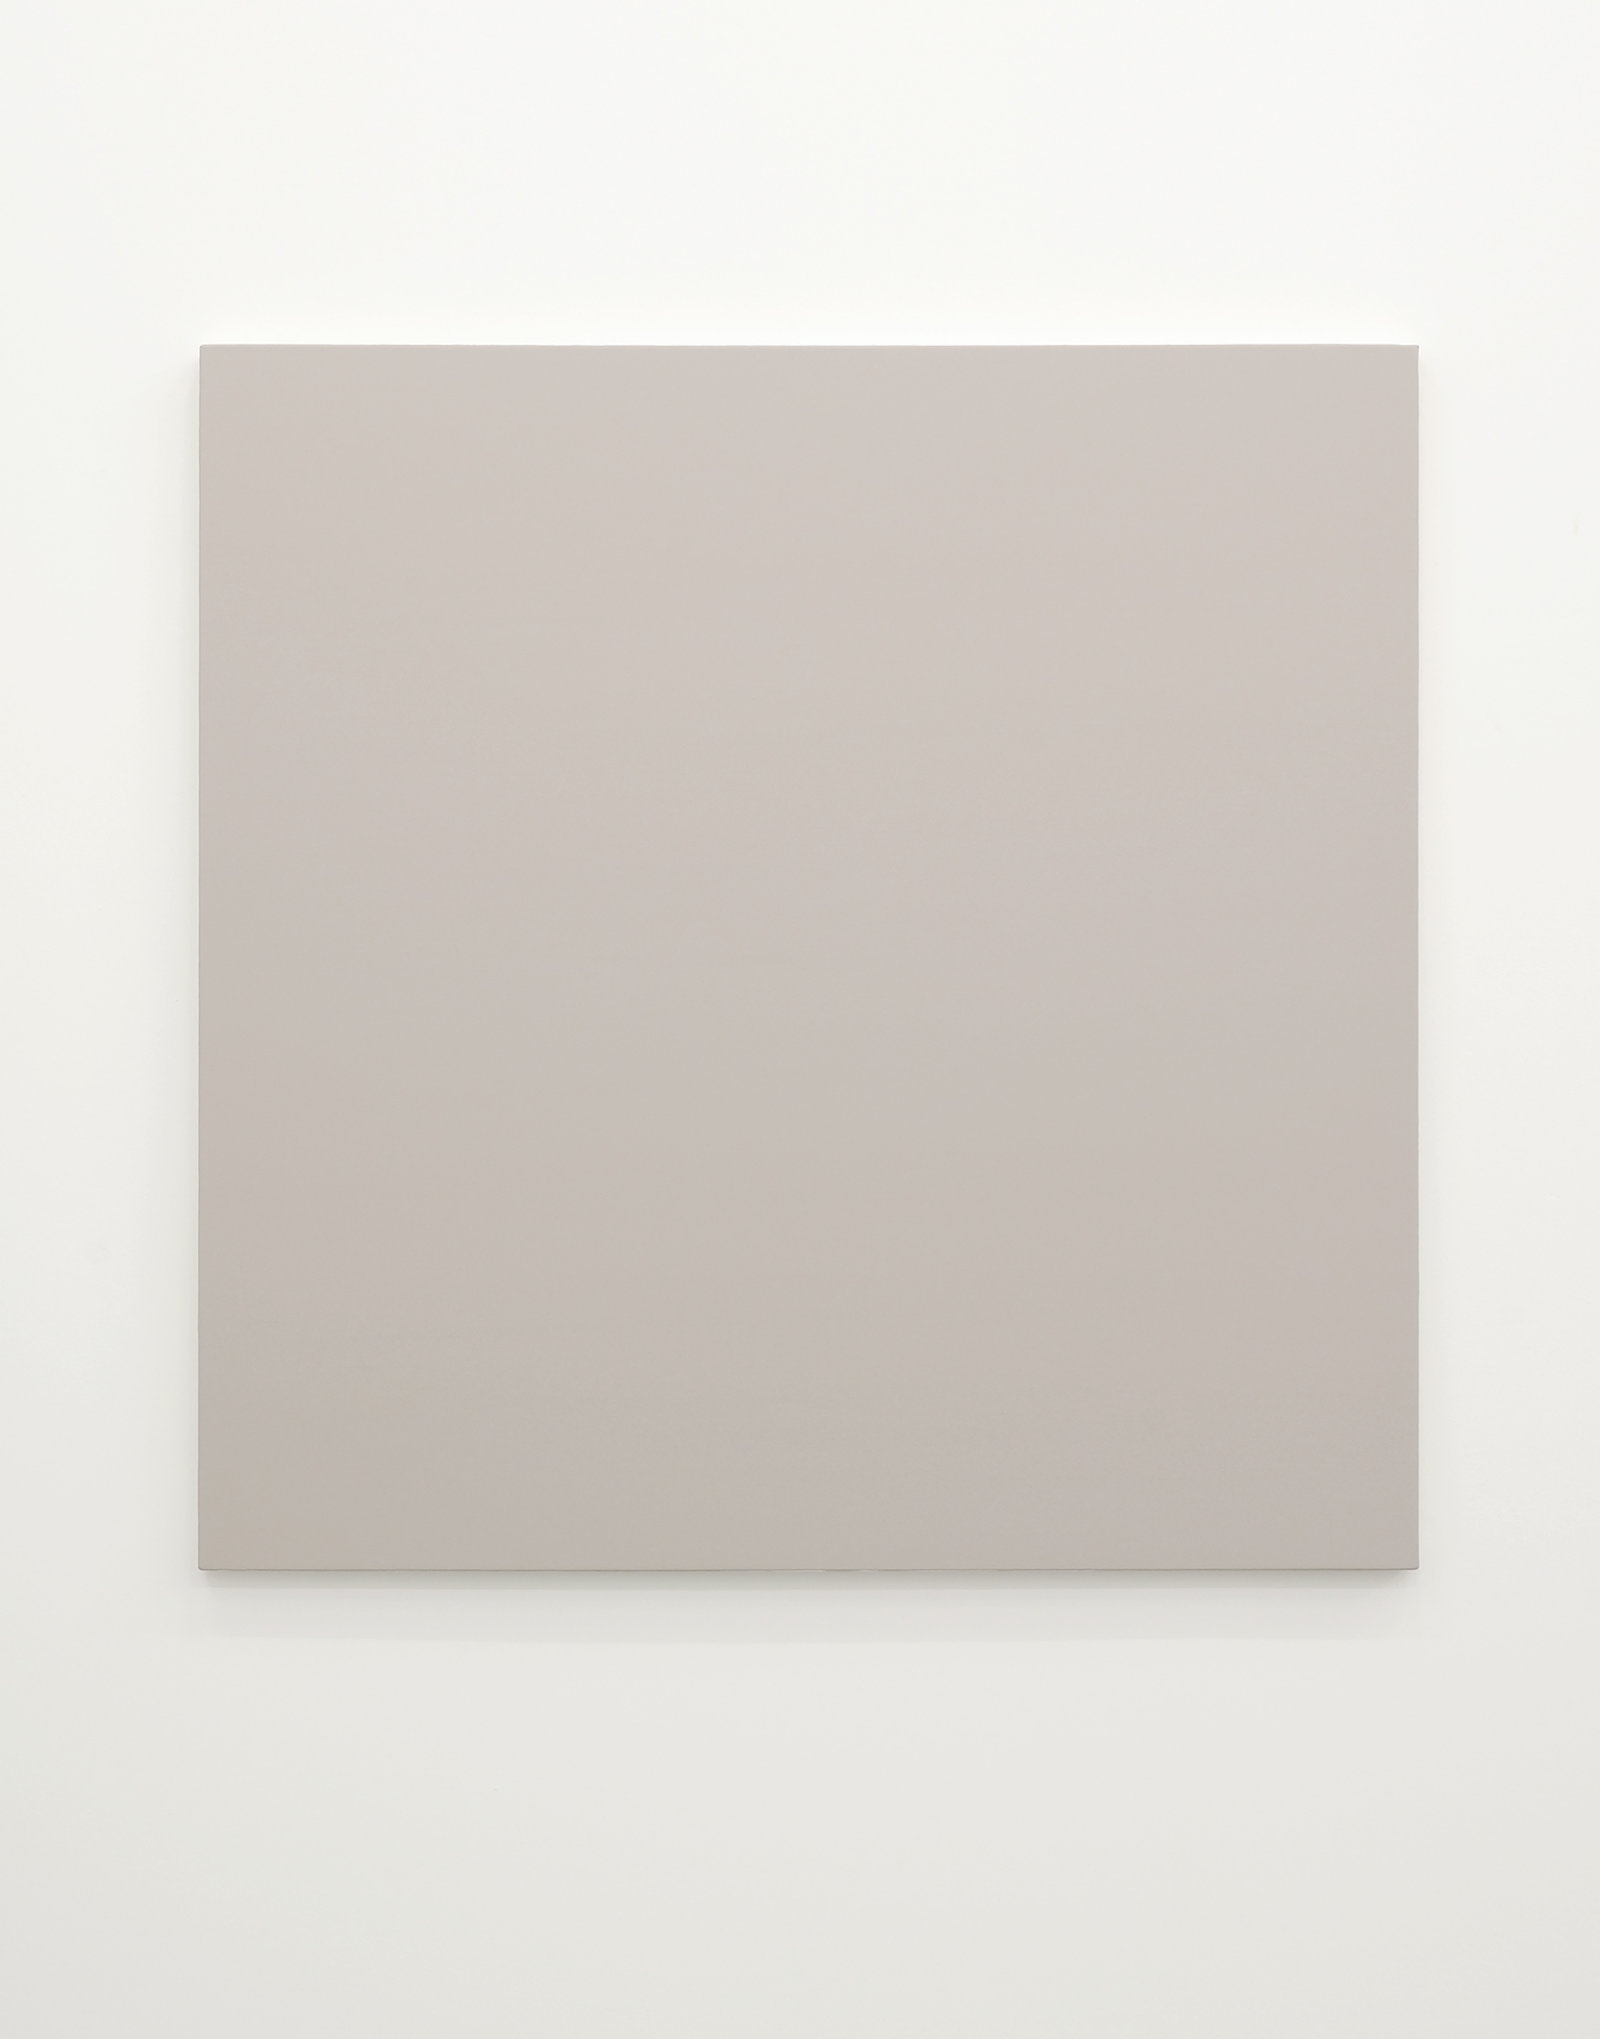 ​Arabella Campbell, Linen Painting Canvas, 2007, acrylic on canvas, 48 x 48 in. (122 x 122 cm) by 